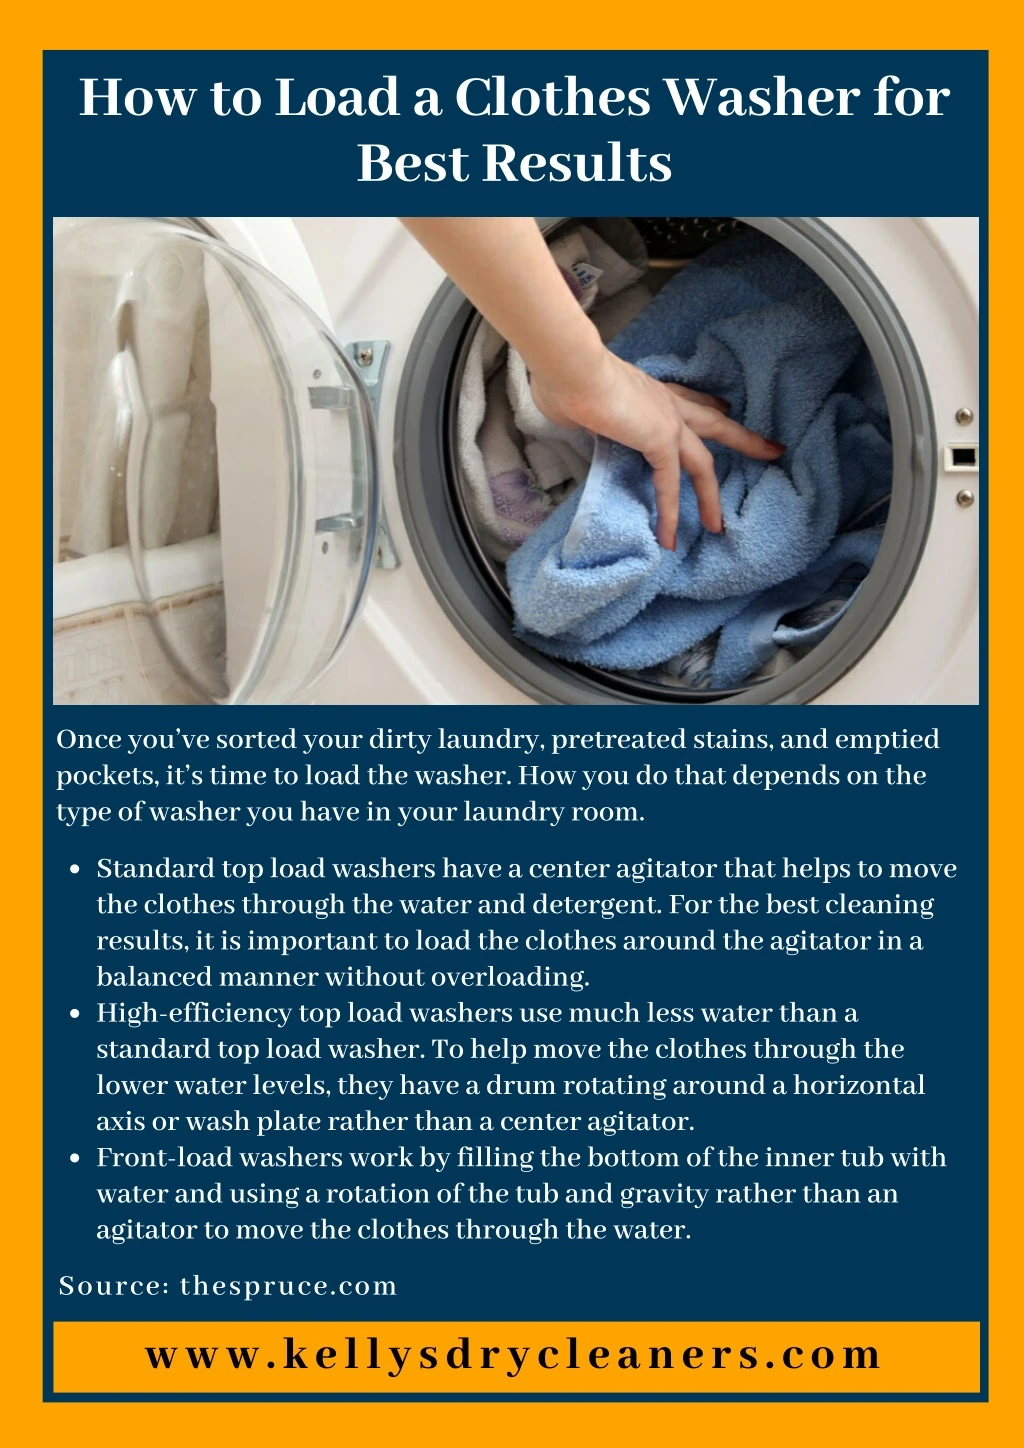 how to load a clothes washer for best results